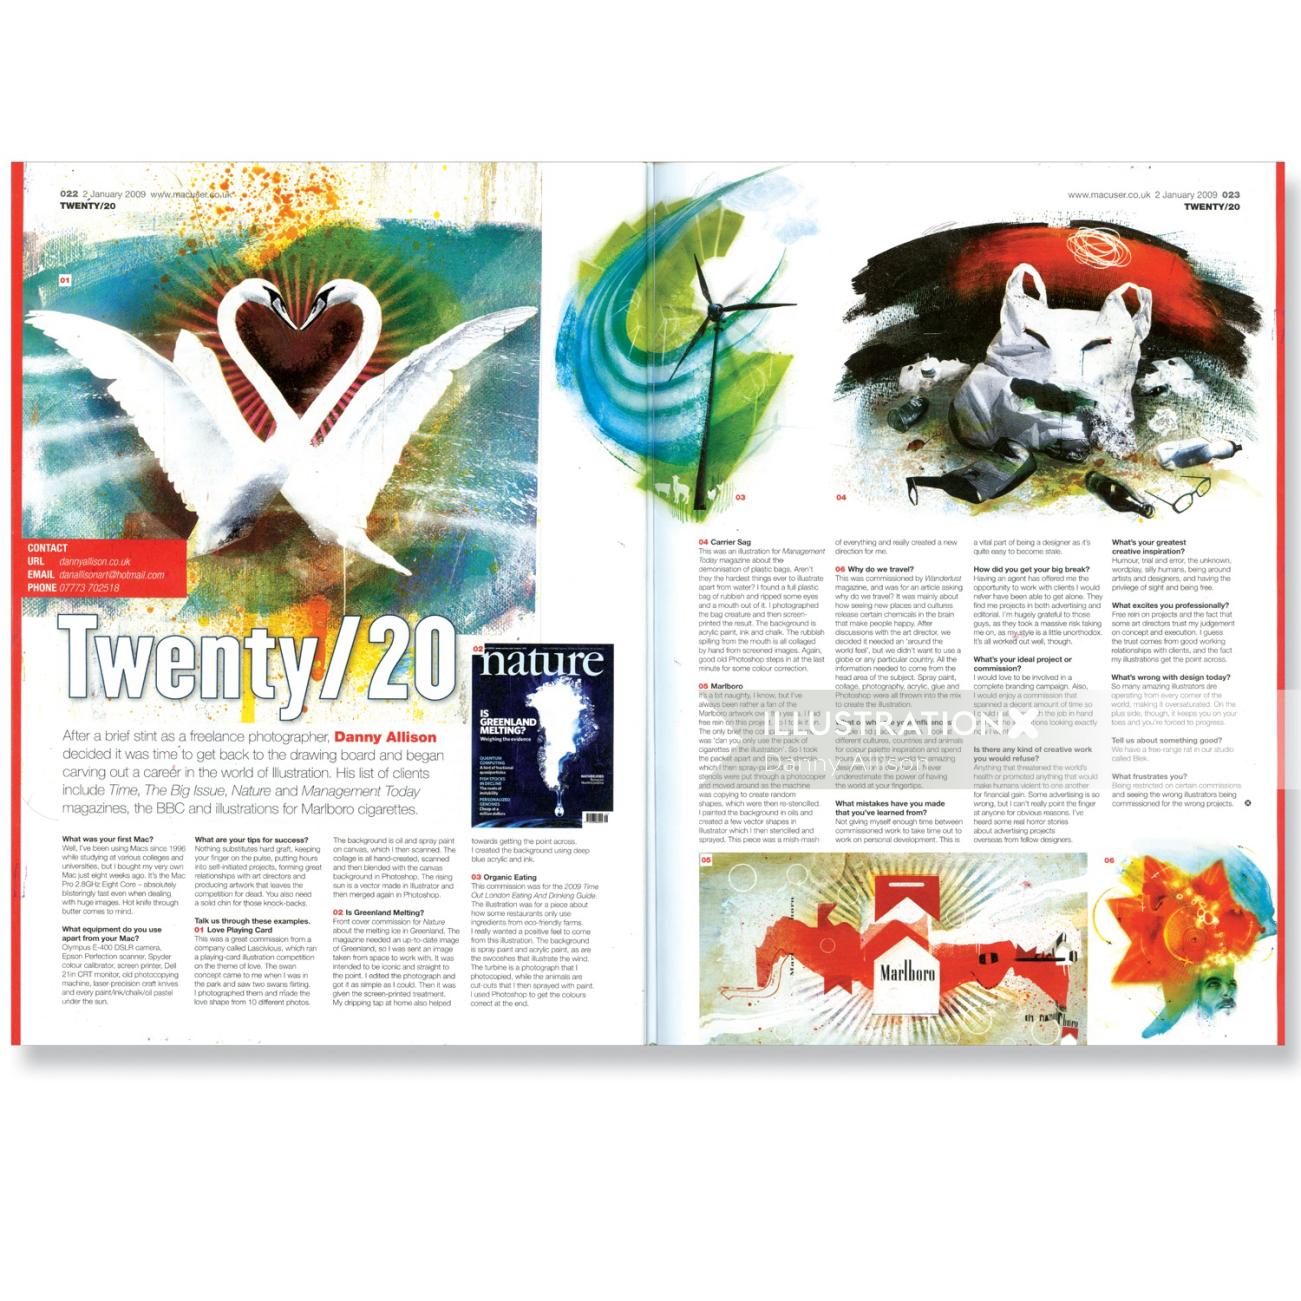 magazine papers with text composed, colorful images on white background, white swans in water